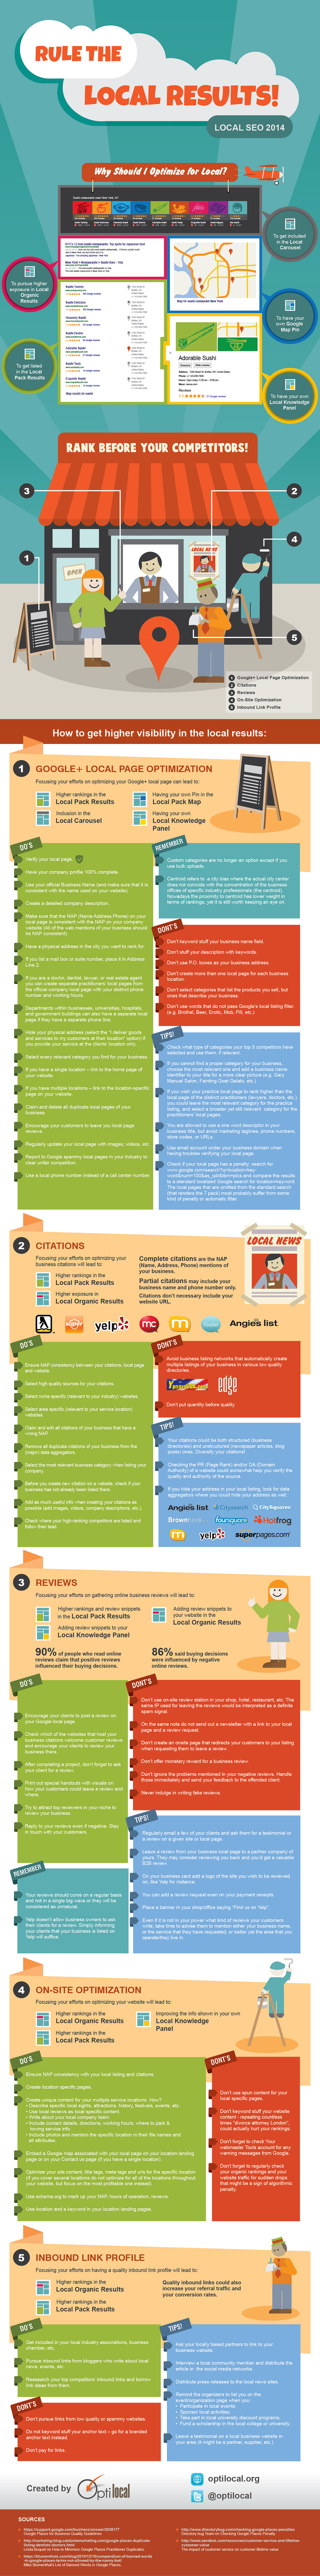 Rule The Local SEO Results infographic